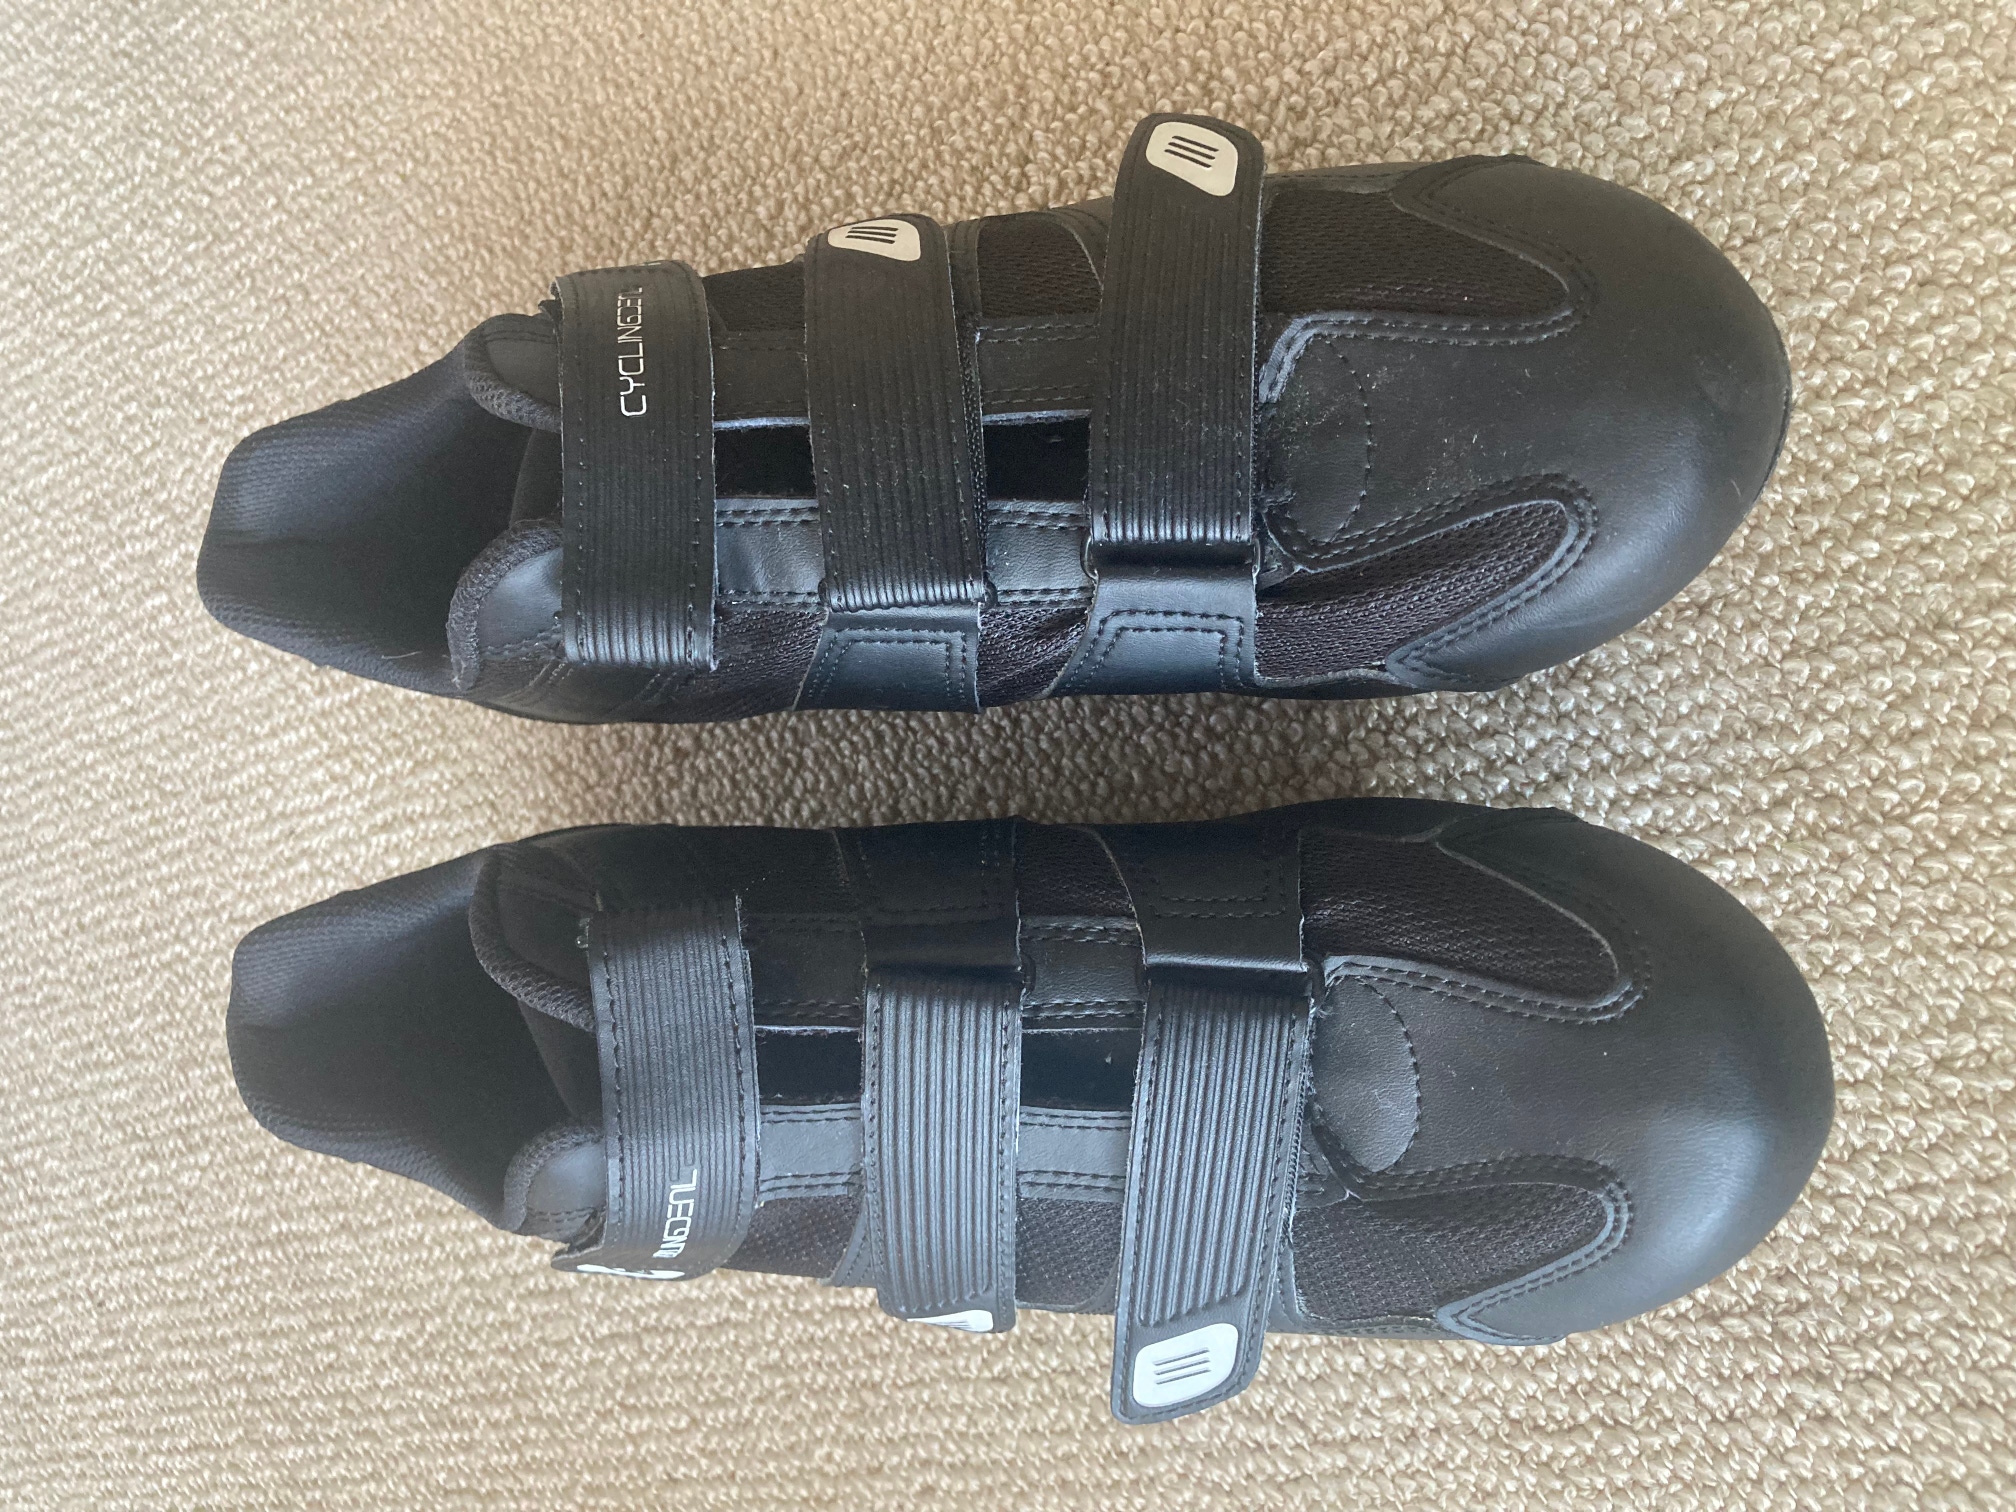 Used Men's Size 12 Cycling Deal Bike Shoes